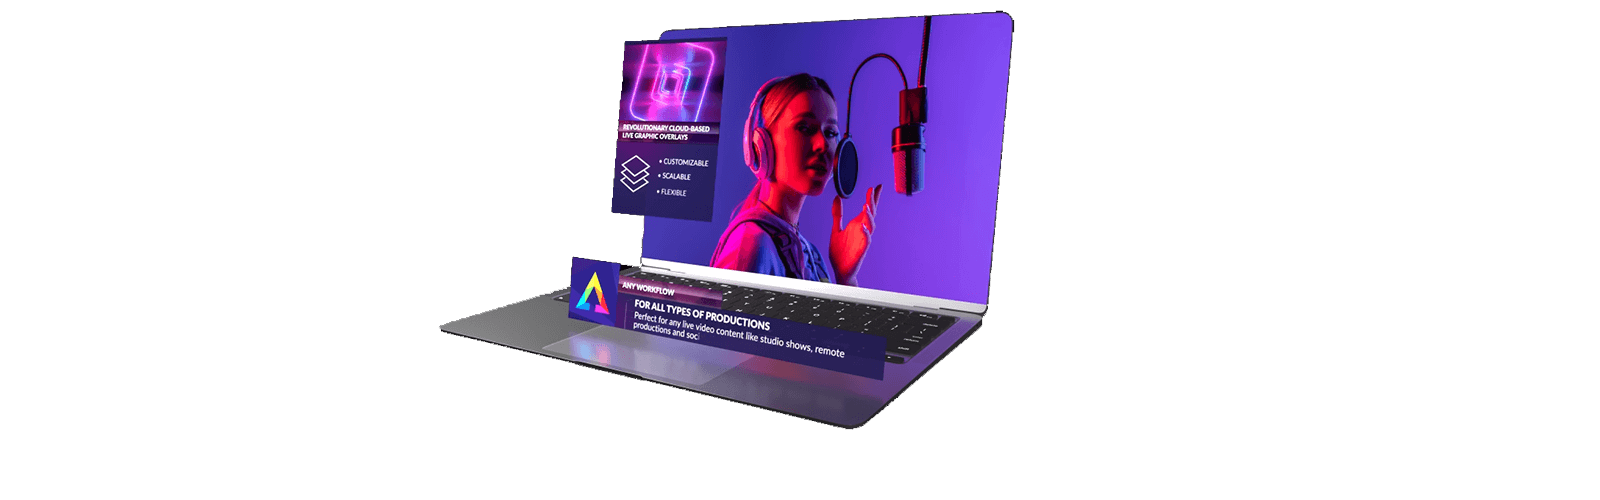 Enhancing Live Video Engagement: Phenix Teams Up with Singular for Interactive Overlays